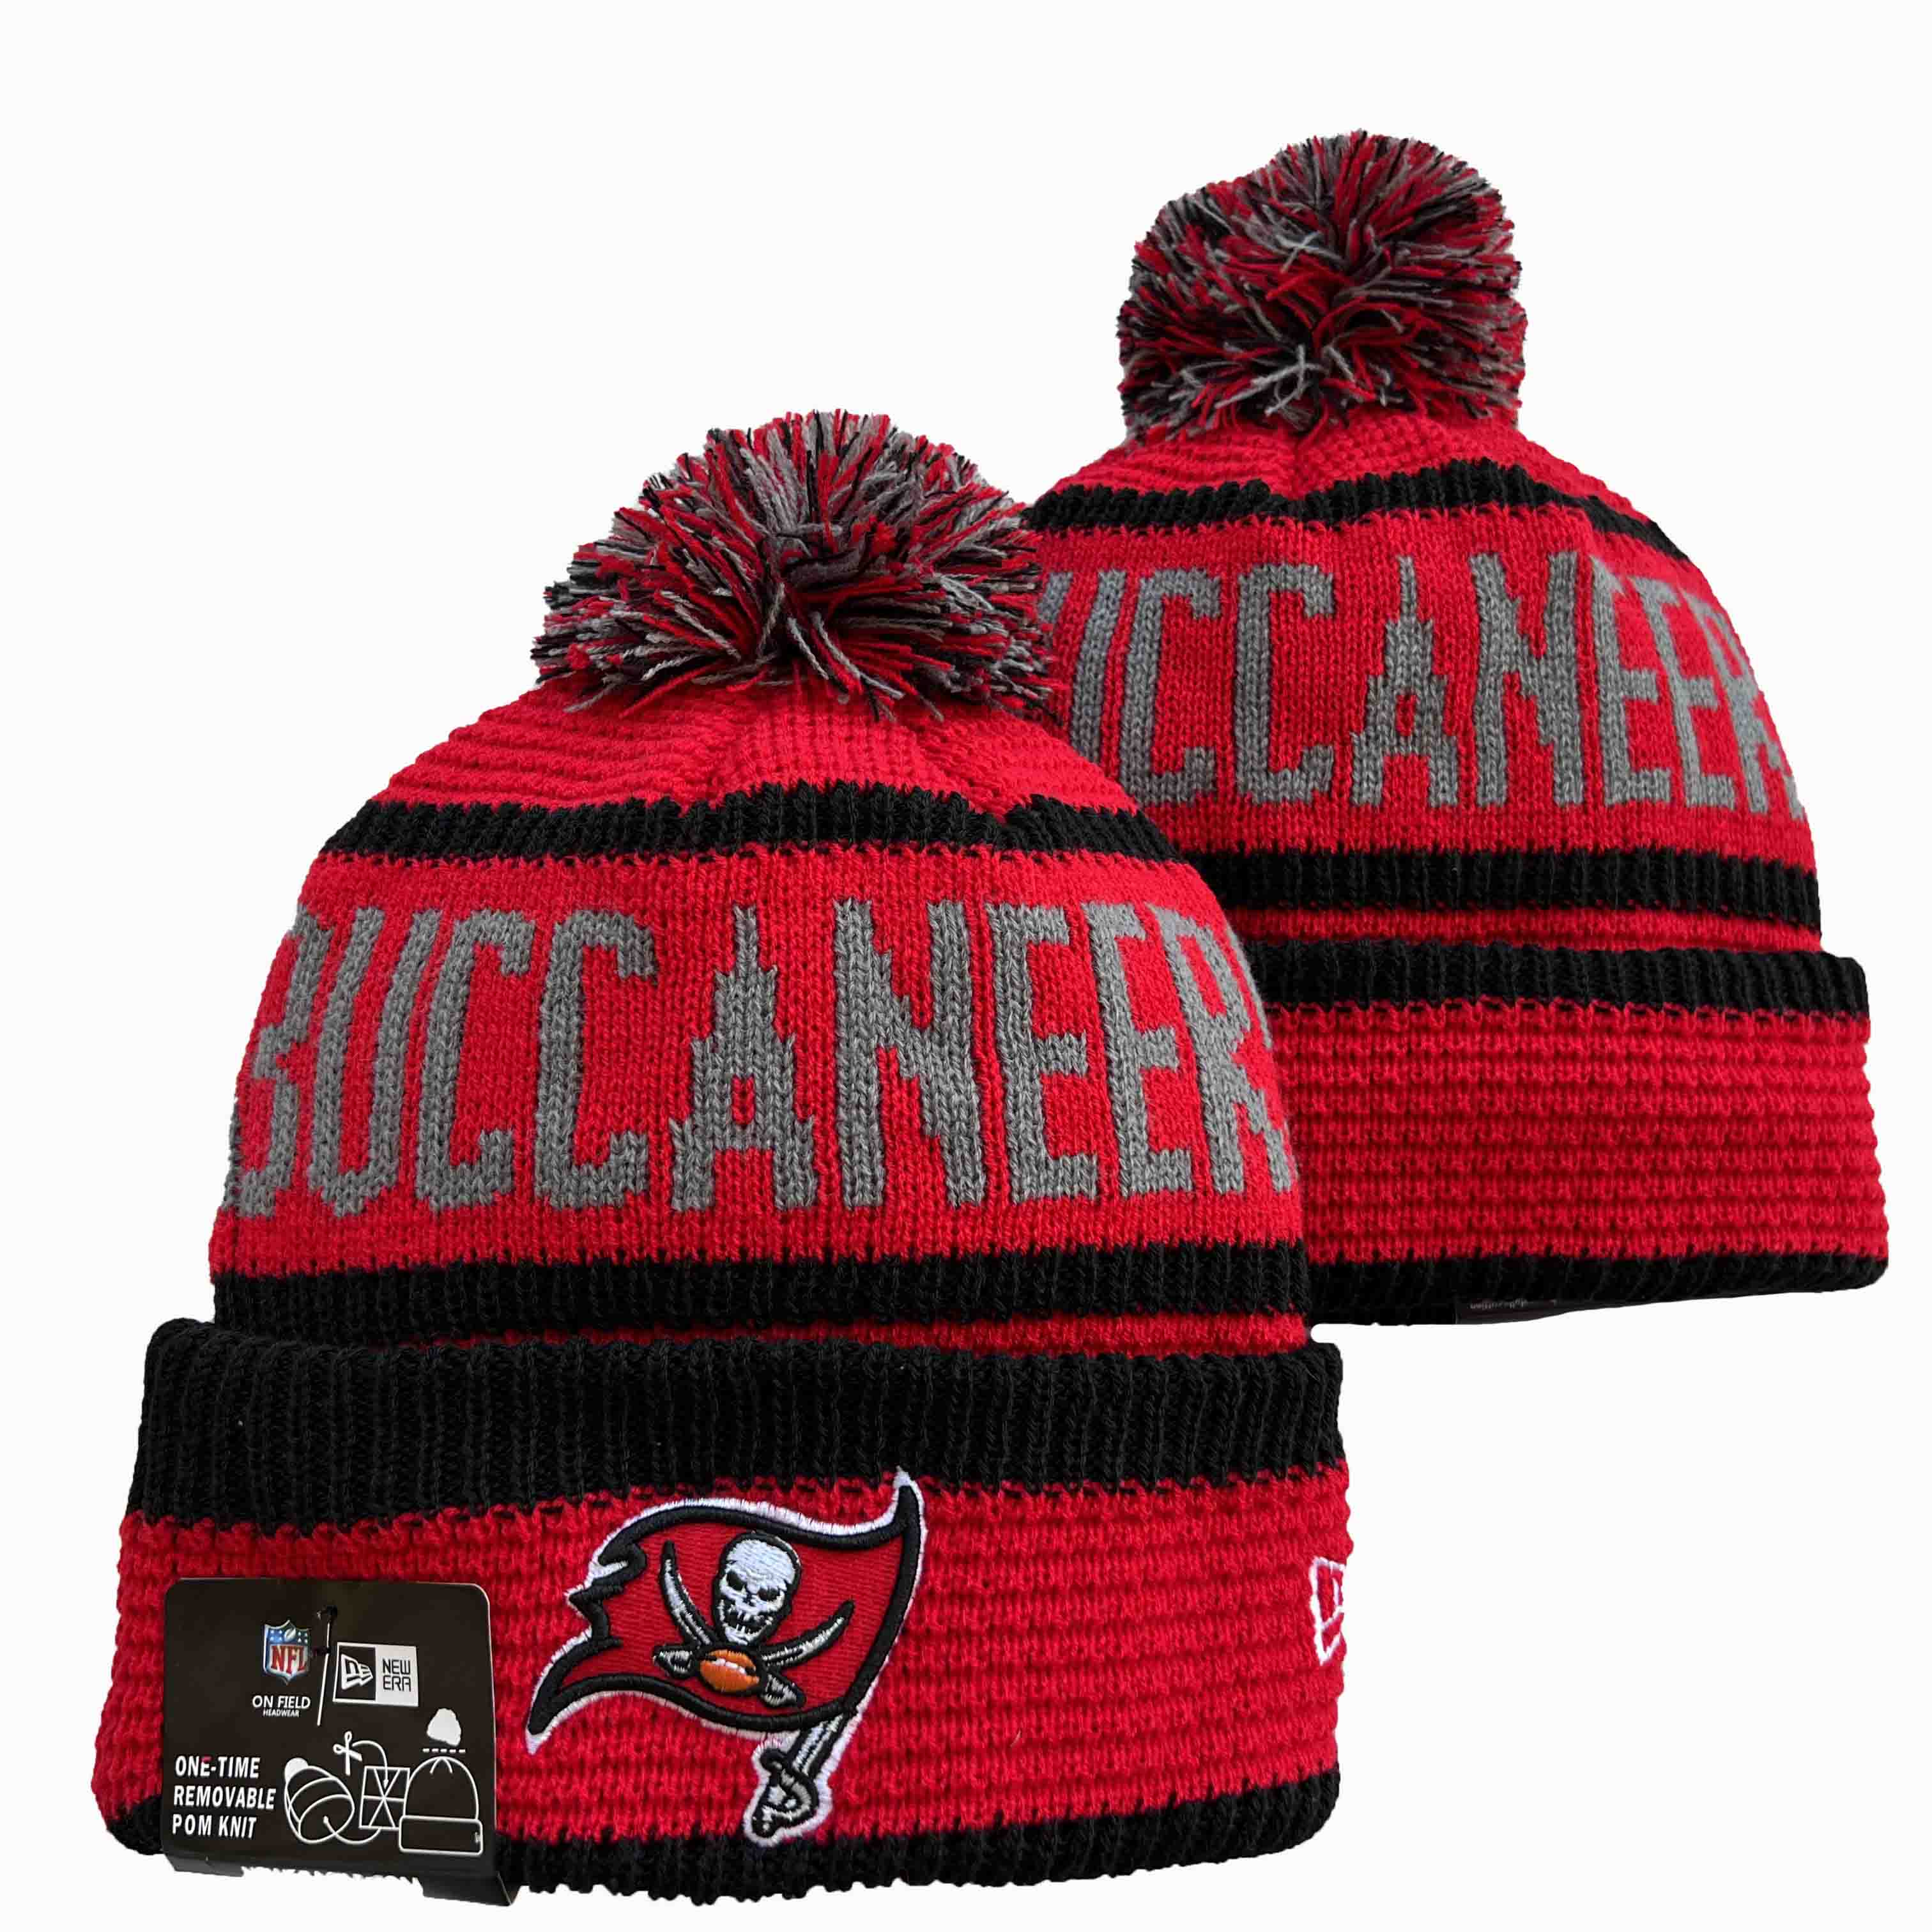 Tampa Bay Buccaneers Knit Hats -3